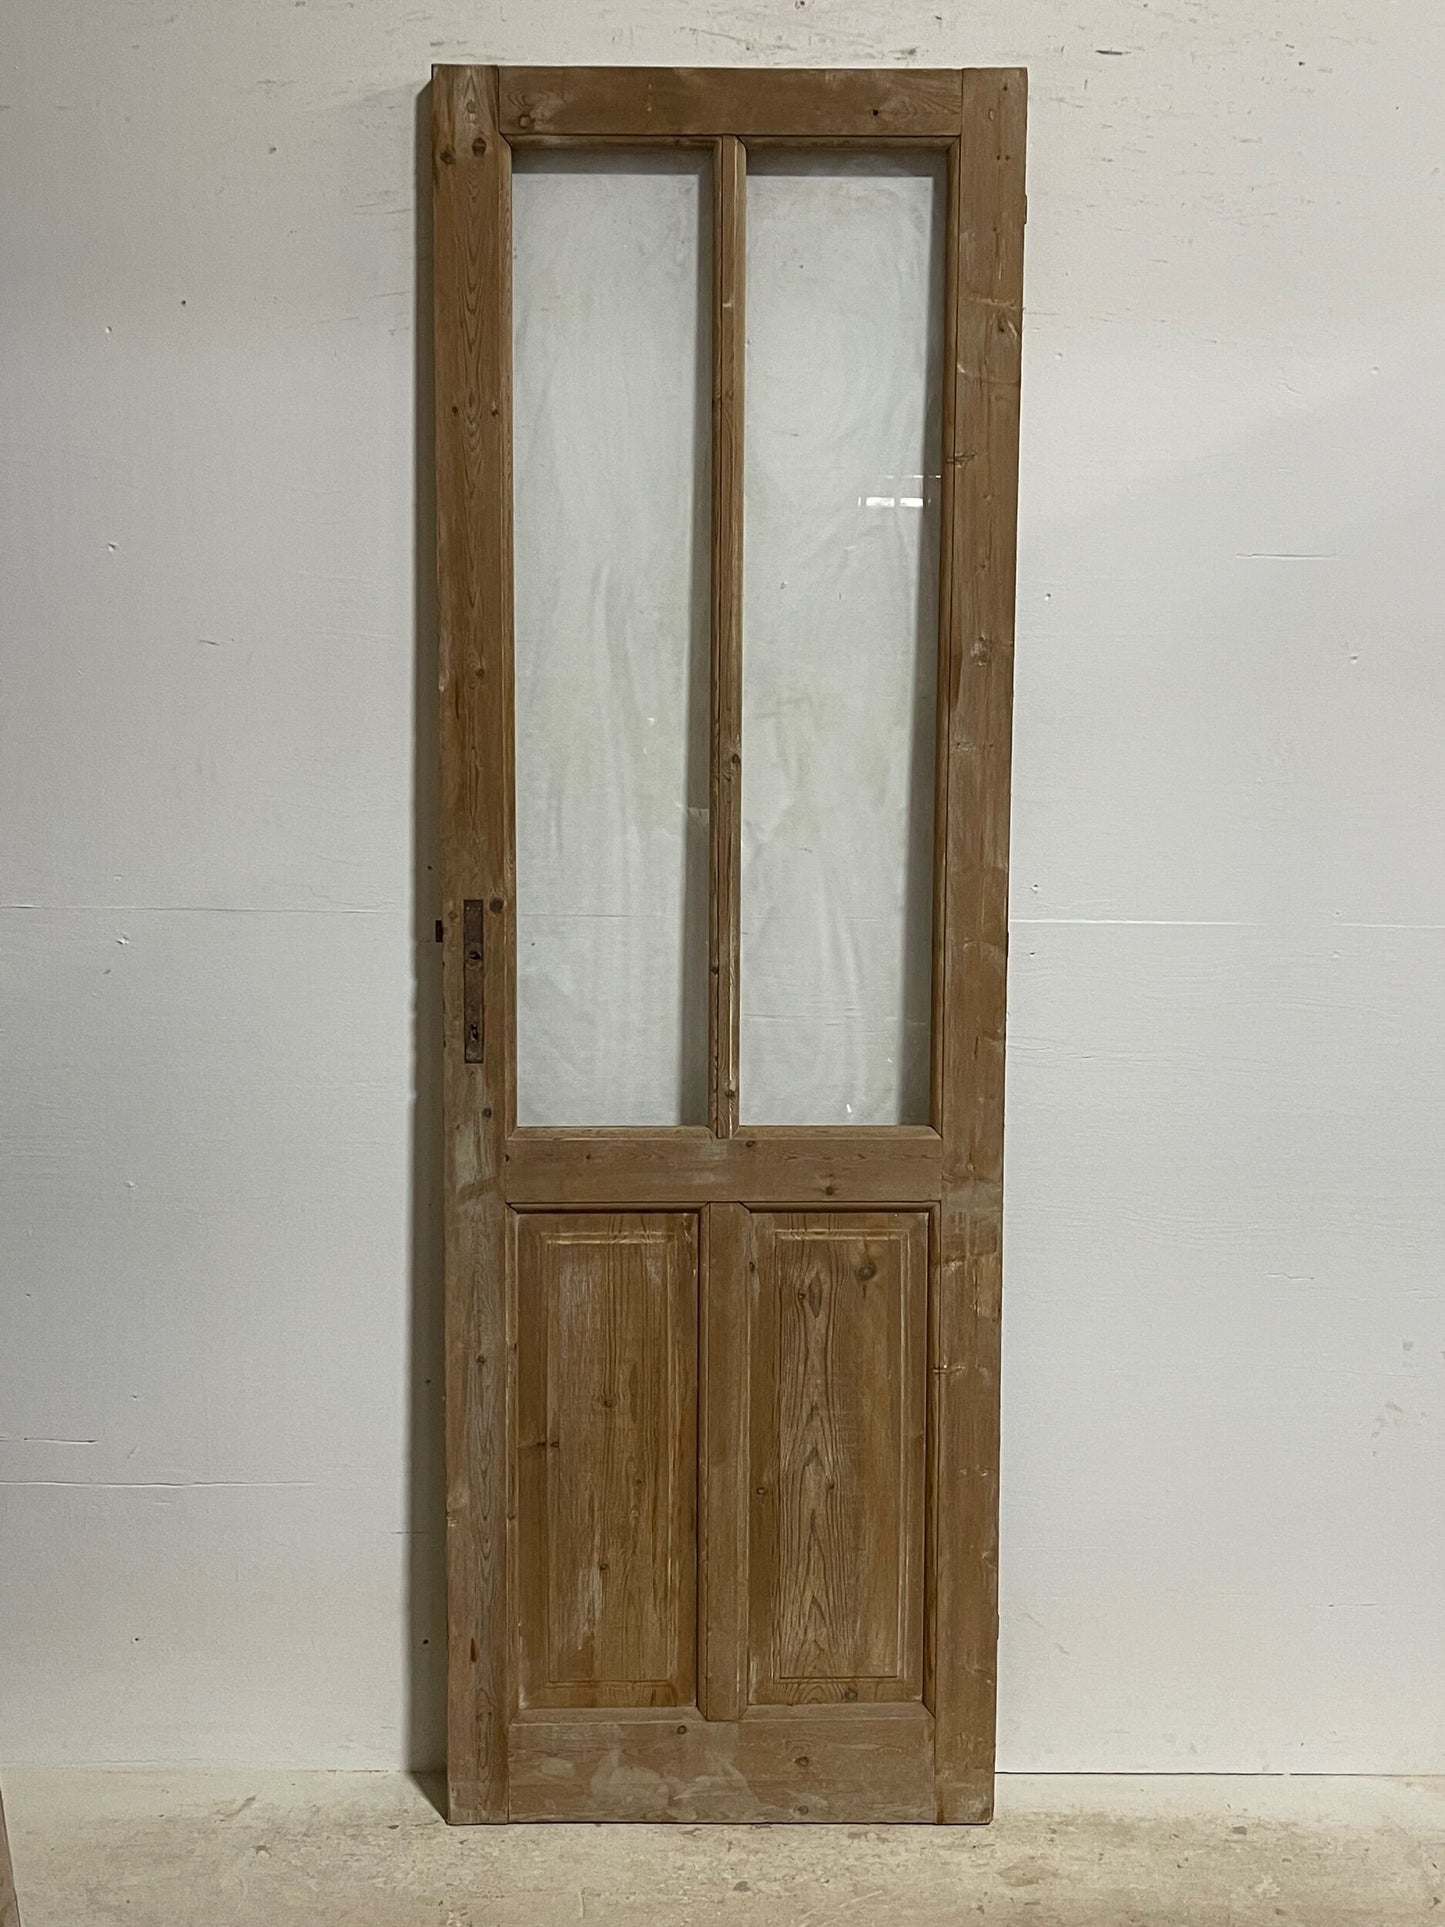 Antique French doors with glass (90.25x29.5) H0185s